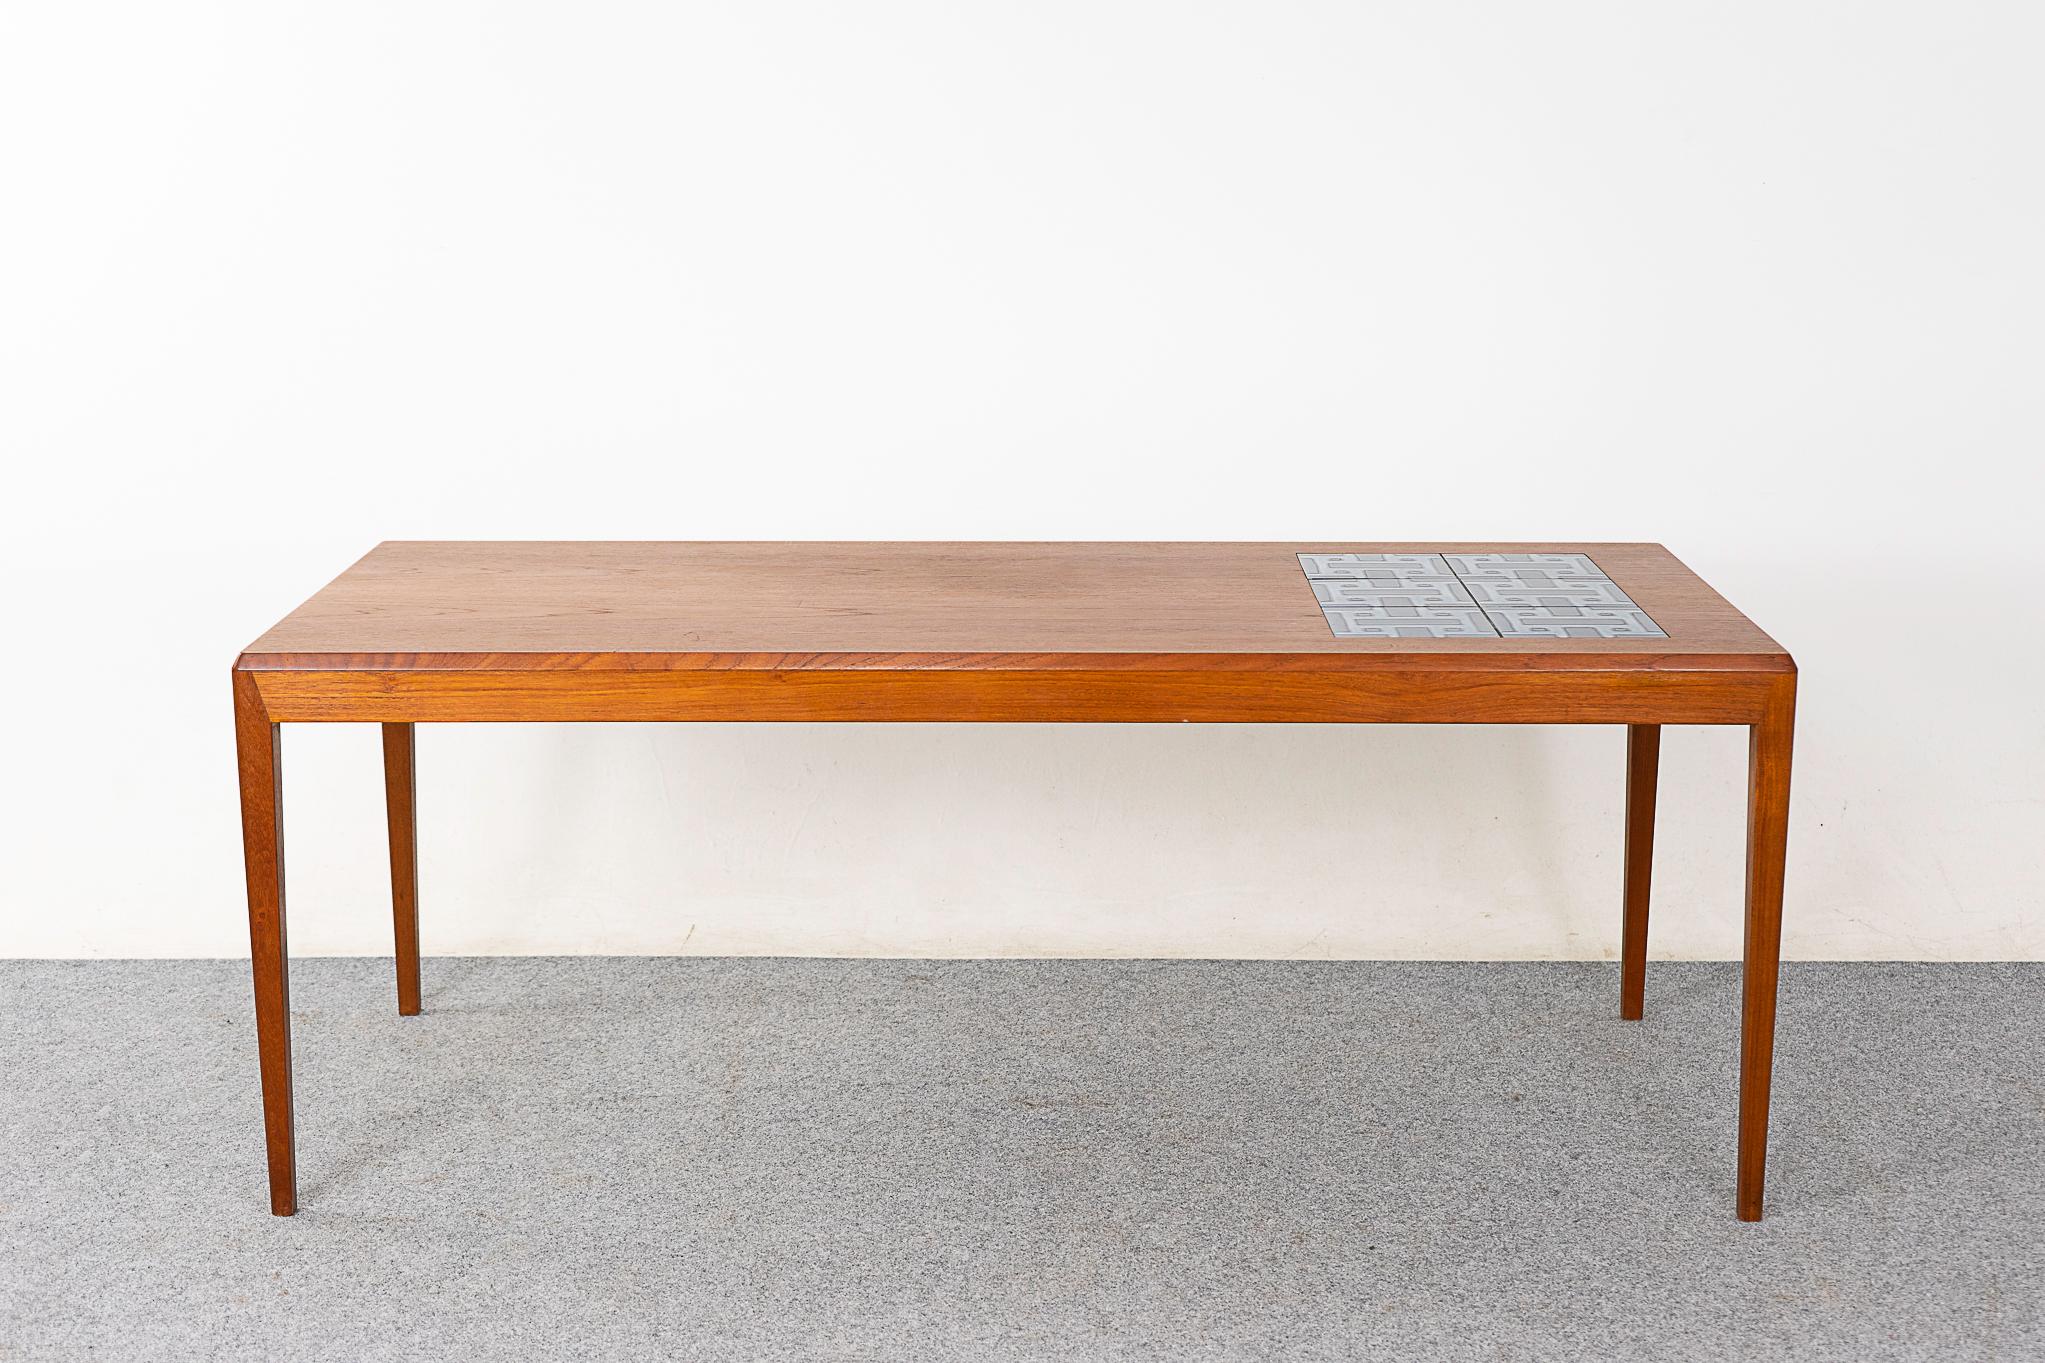 Teak & tile Danish coffee table, circa 1960's. Generously sized top surface with book matched veneer and vibrant ceramic tiles, ideal for beverages! Solid wood edging along the length and sleek tapering legs.